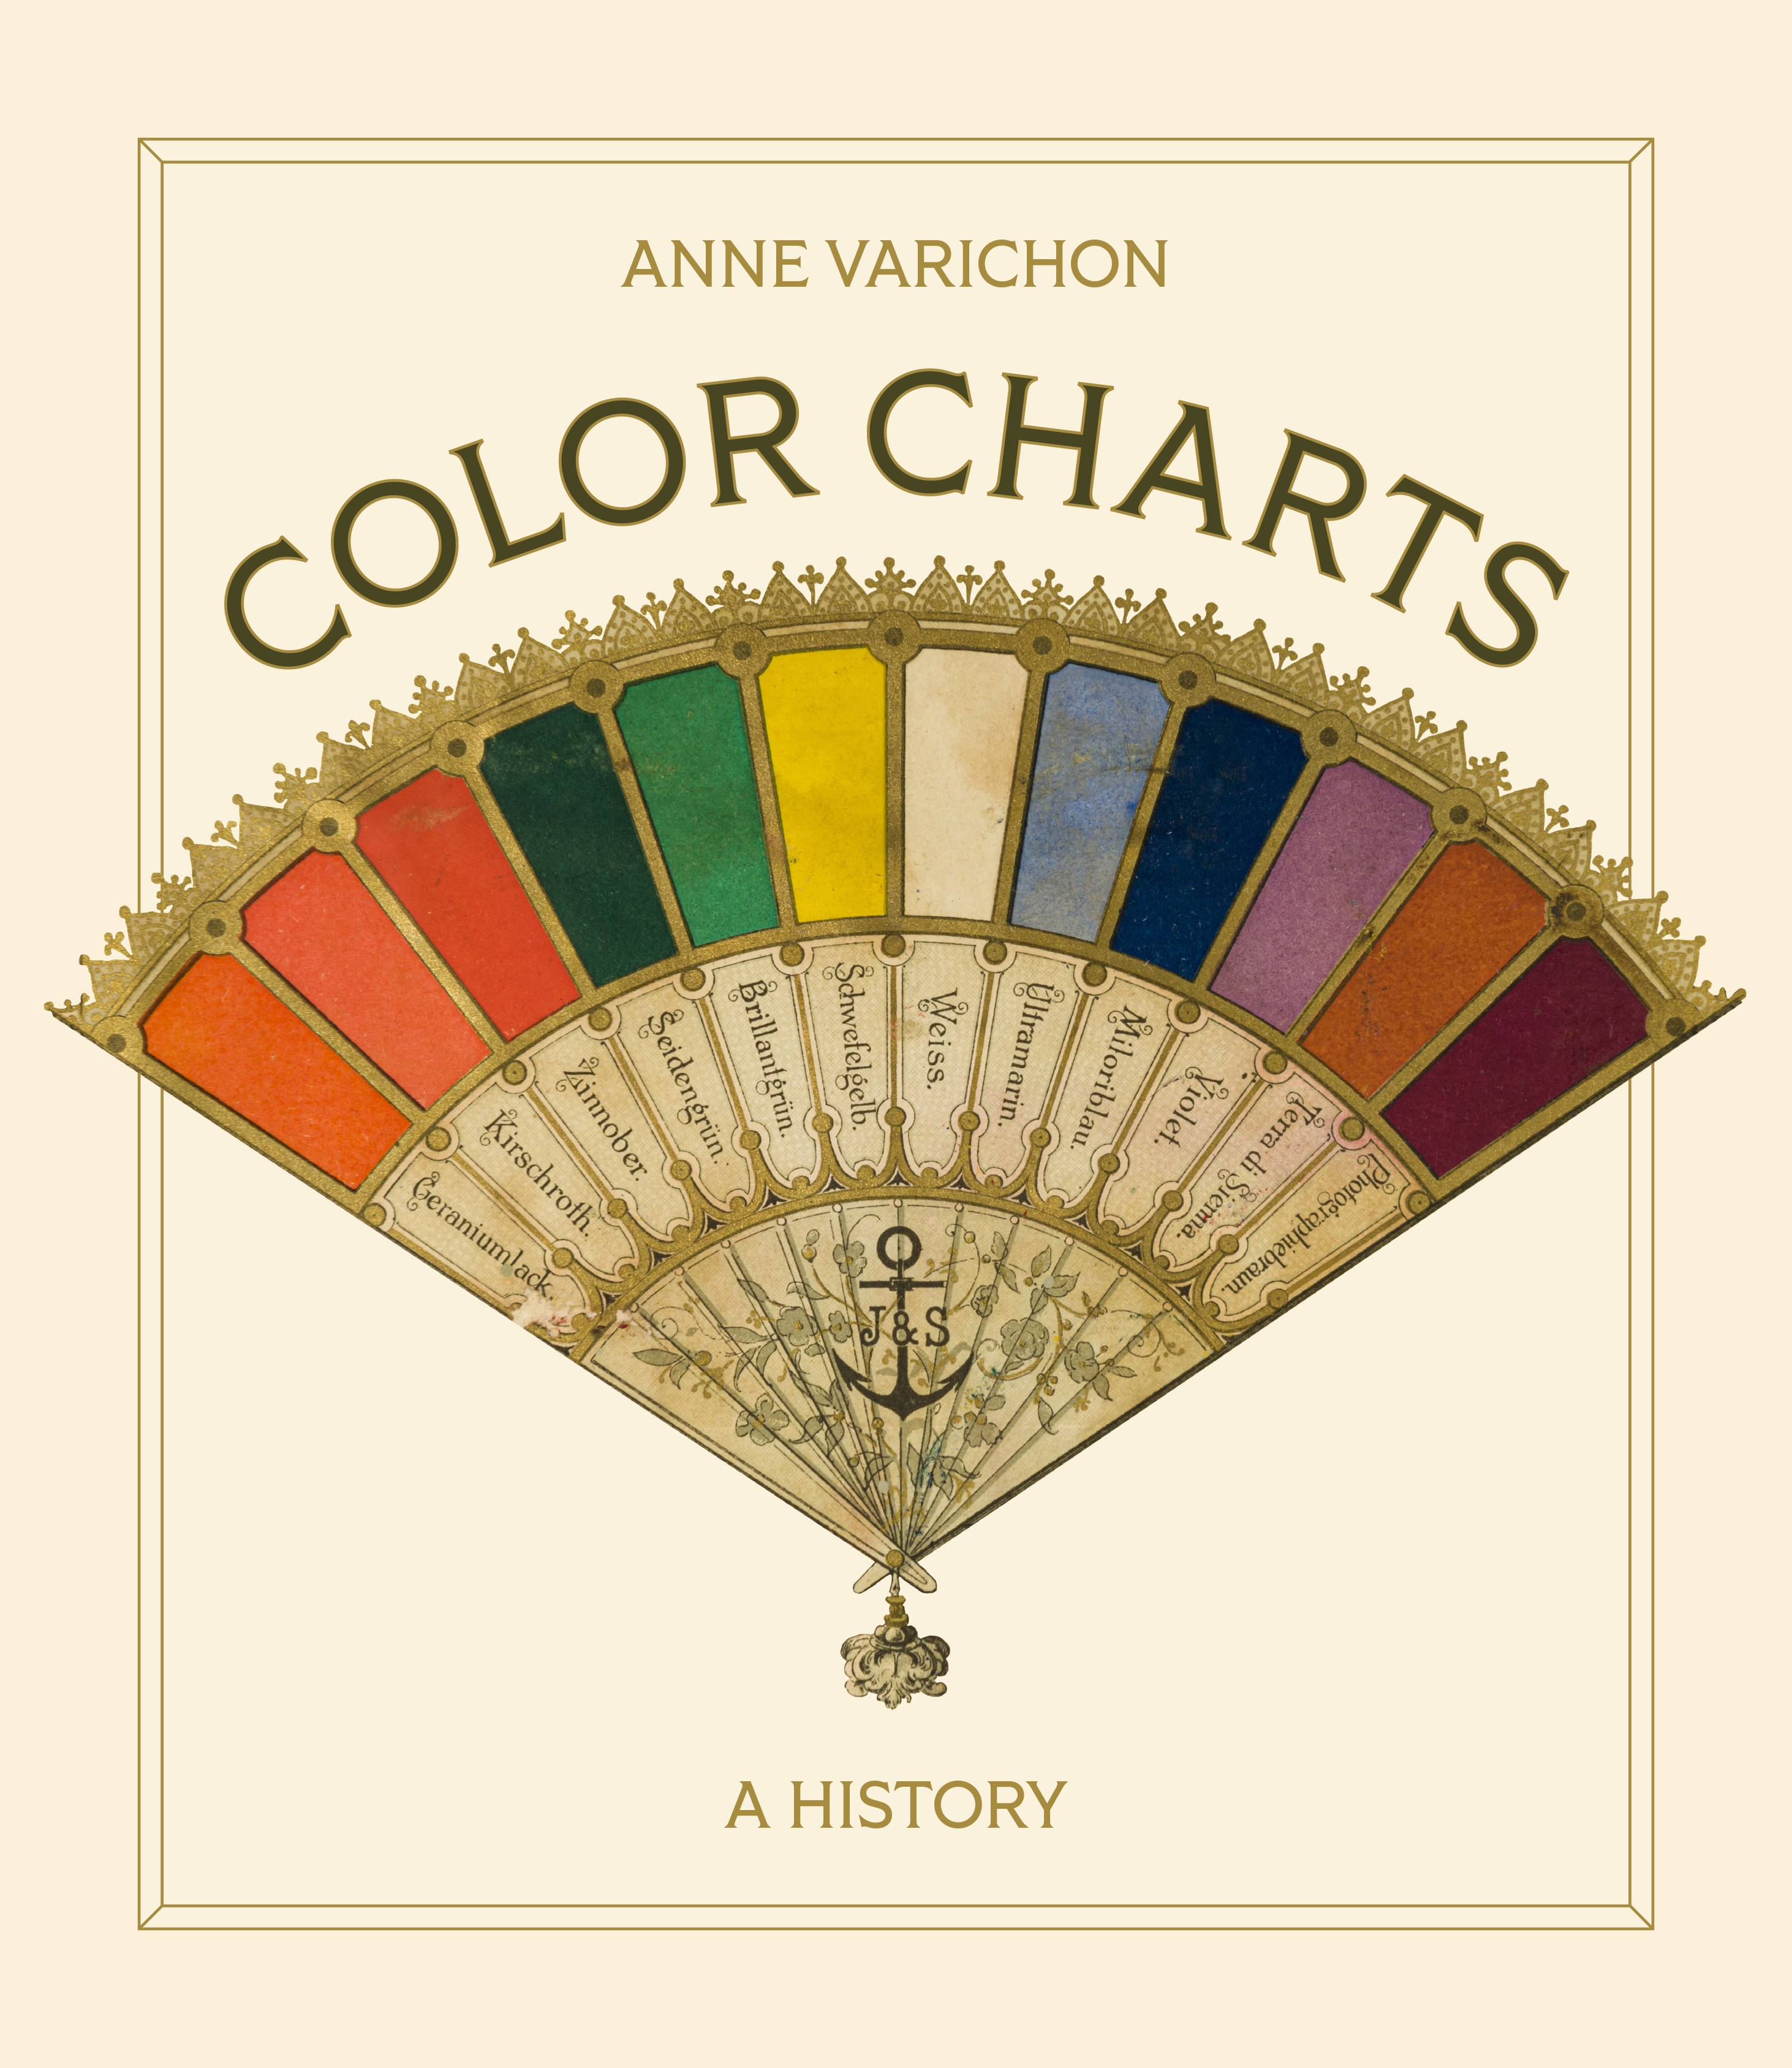 Cover of Color Charts featuring samples of paint colors arranged in a fan